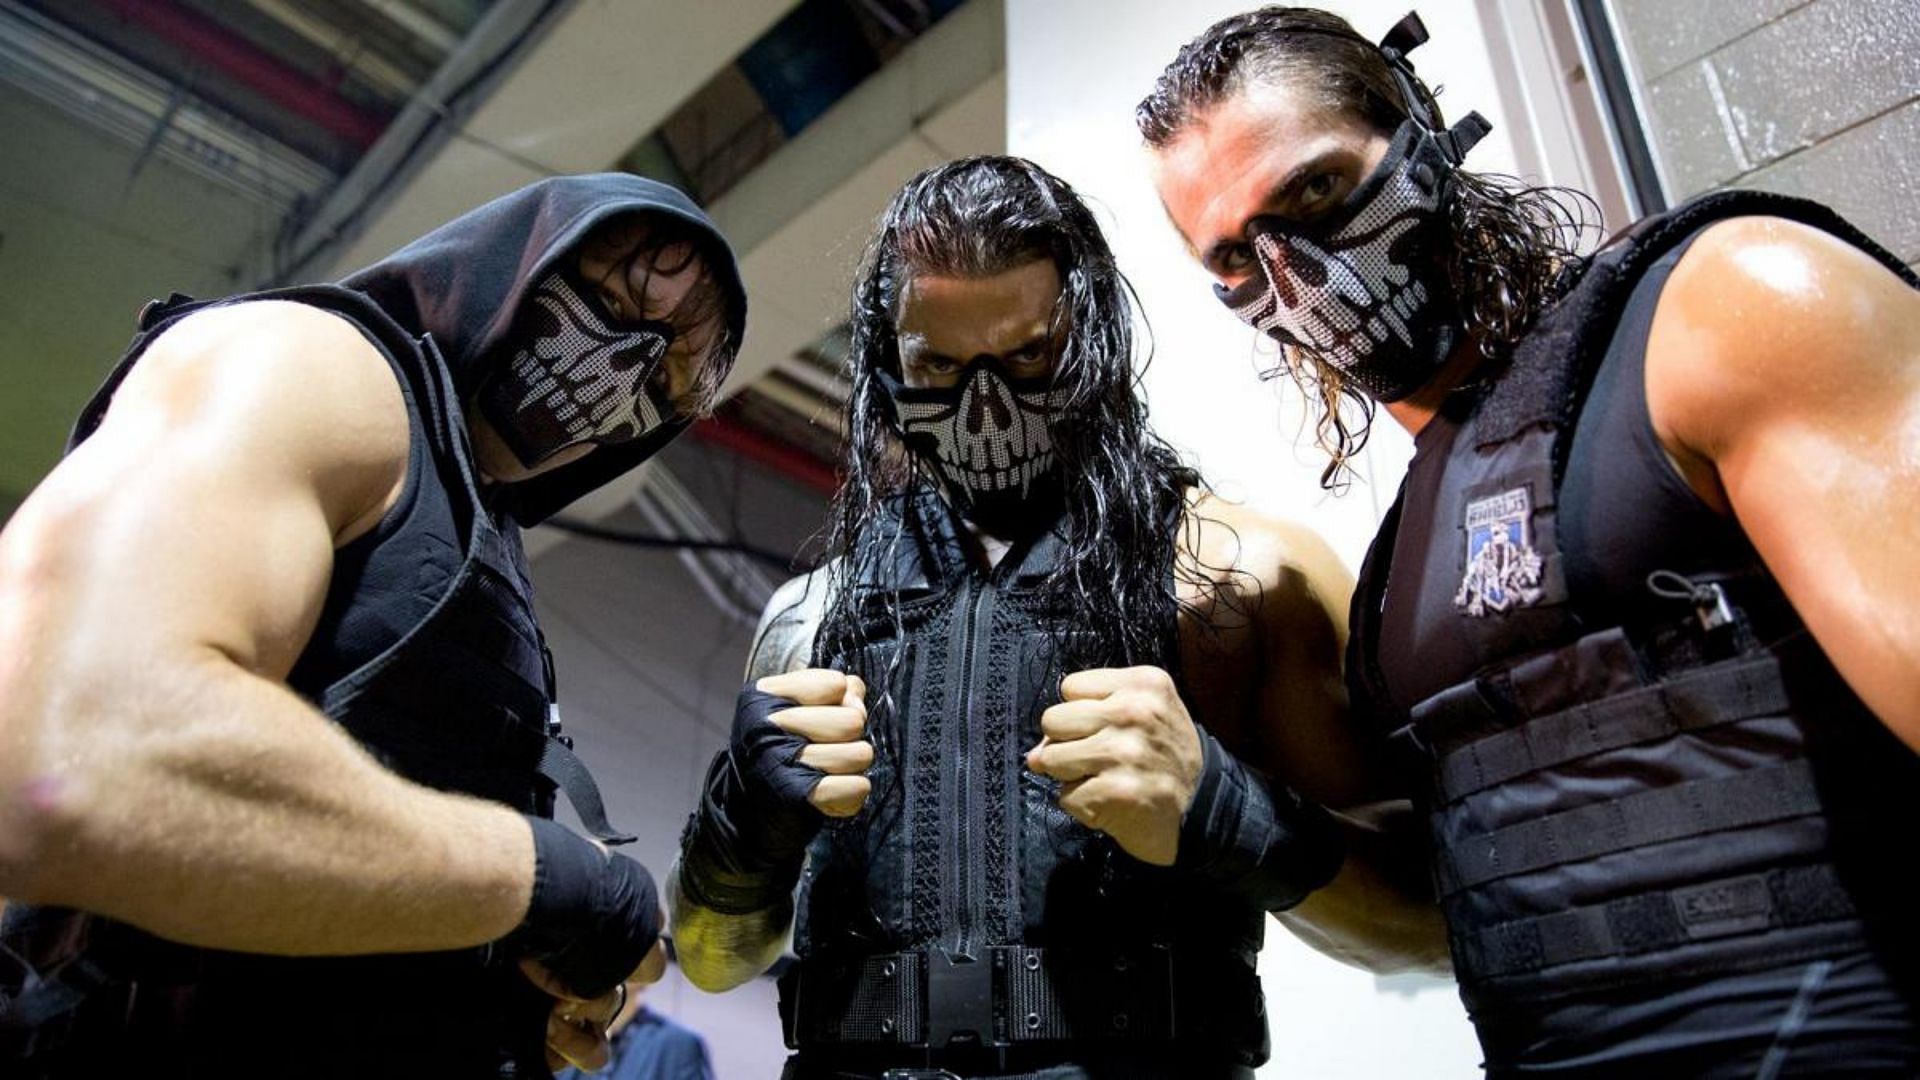 Jon Moxley, Roman Reigns, and Seth Rollins